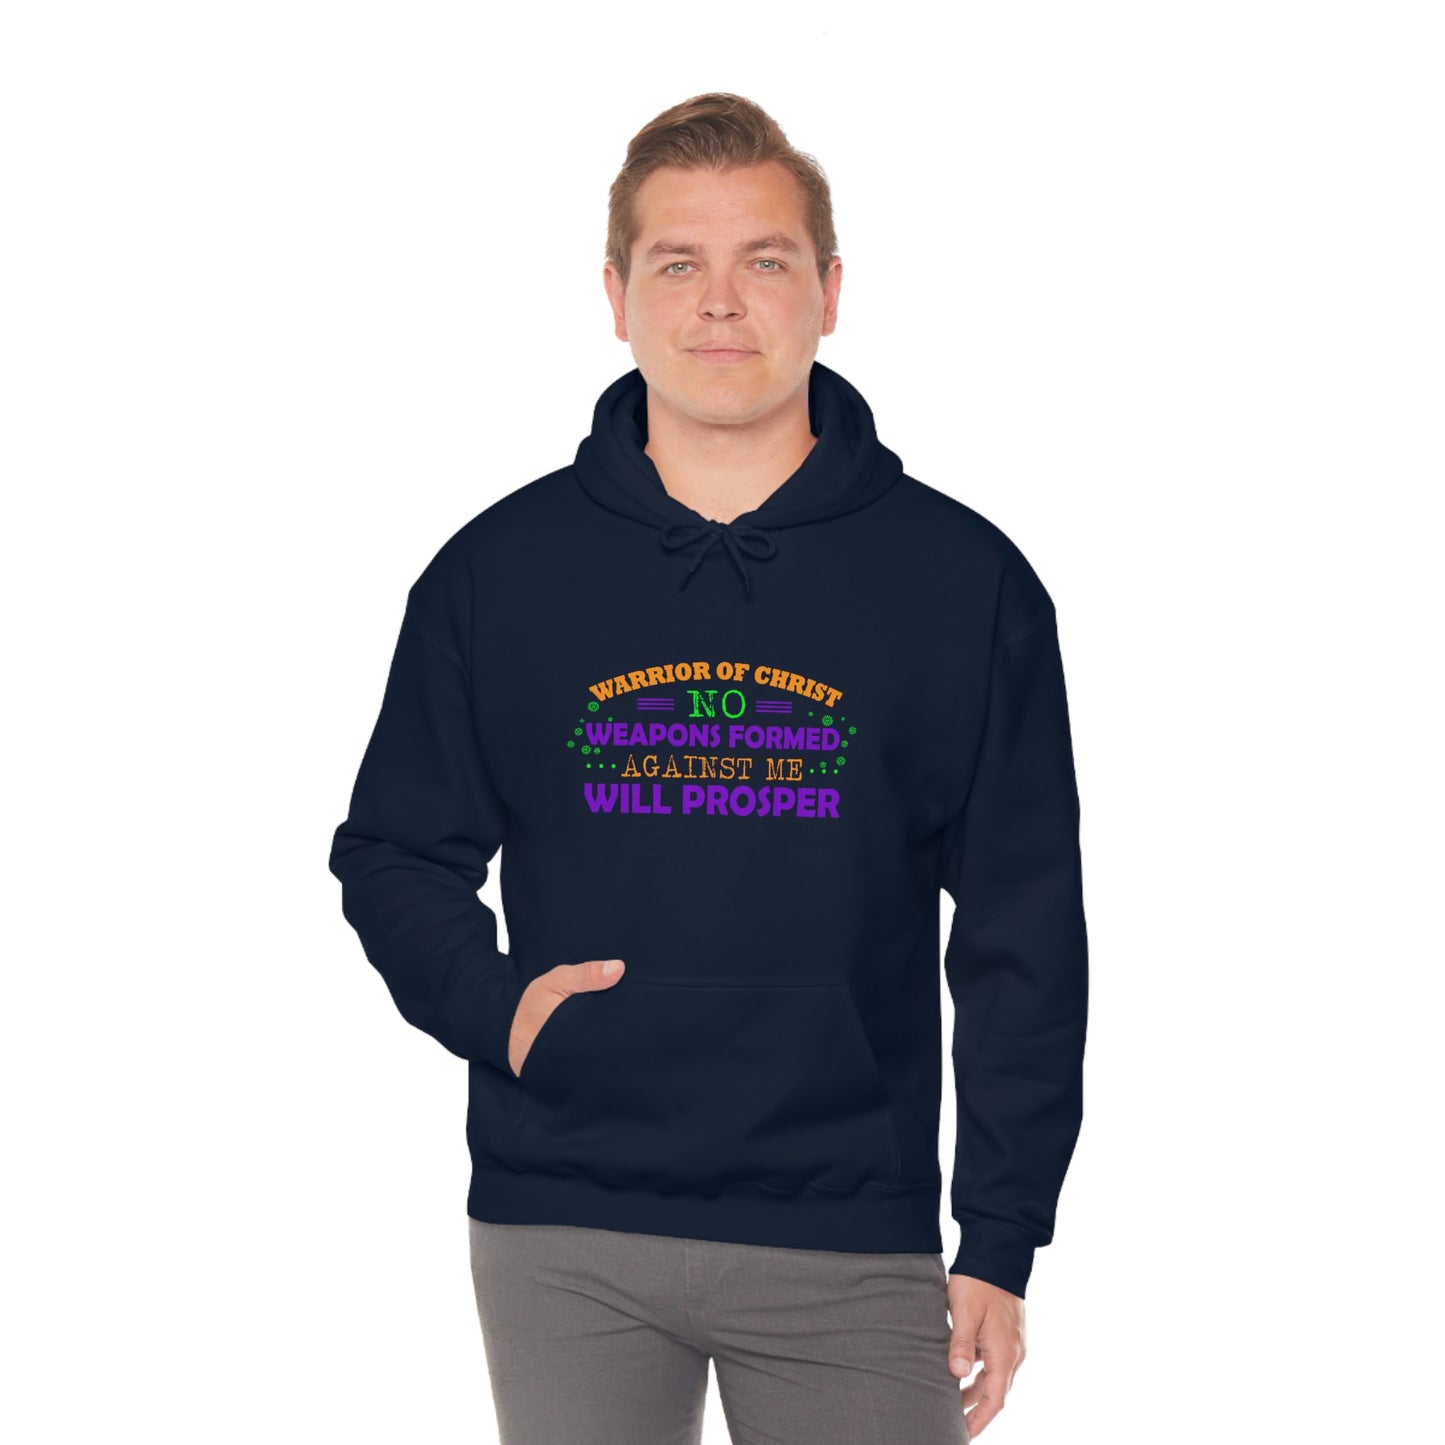 Warrior Of Christ No Weapons Formed Against Me Will Prosper  Unisex Pull On Hooded sweatshirt